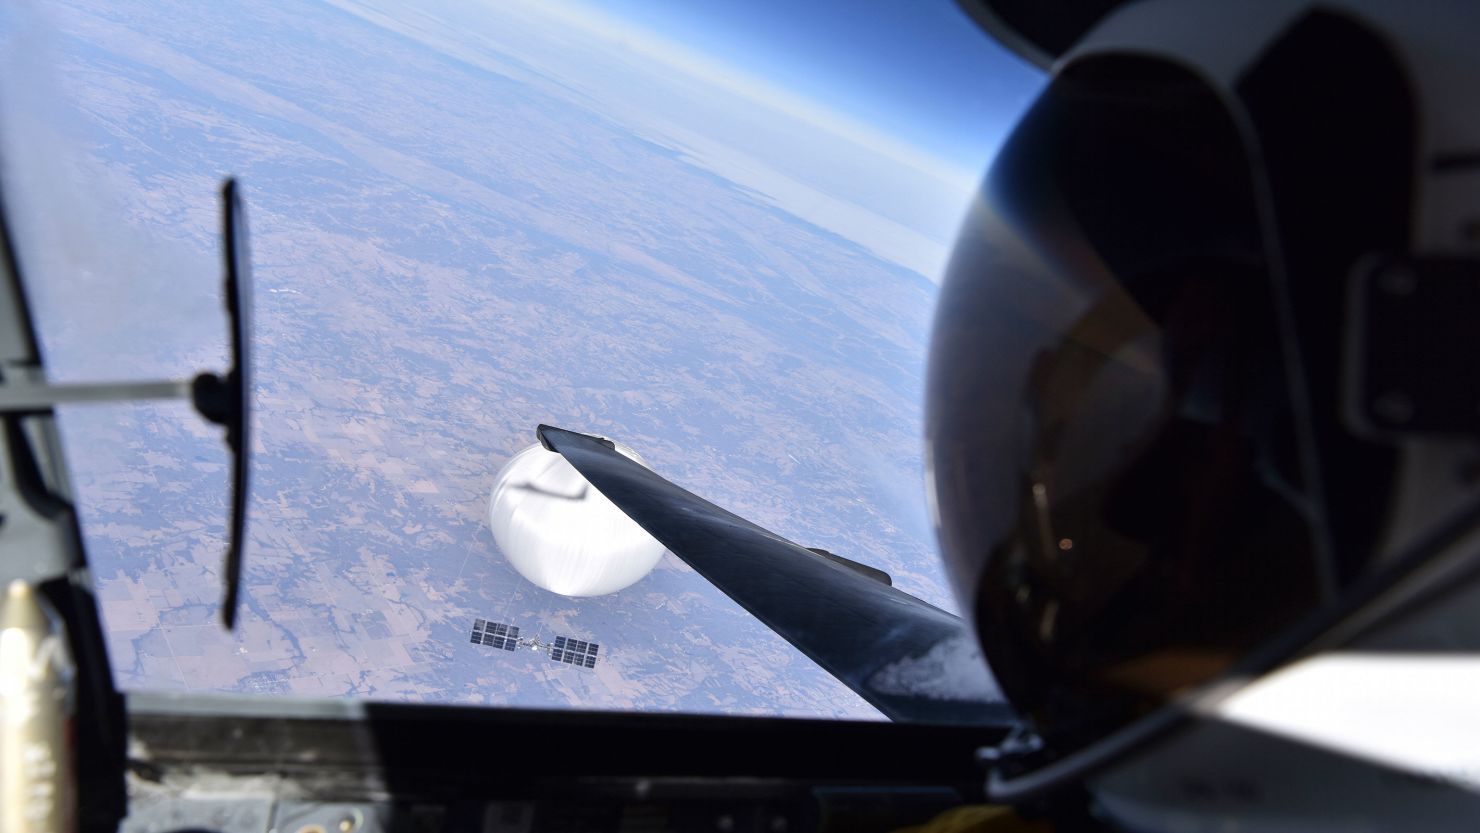 A US Air Force pilot looked down at the suspected Chinese surveillance balloon as it hovered over the Central Continental United States February 3, 2023.